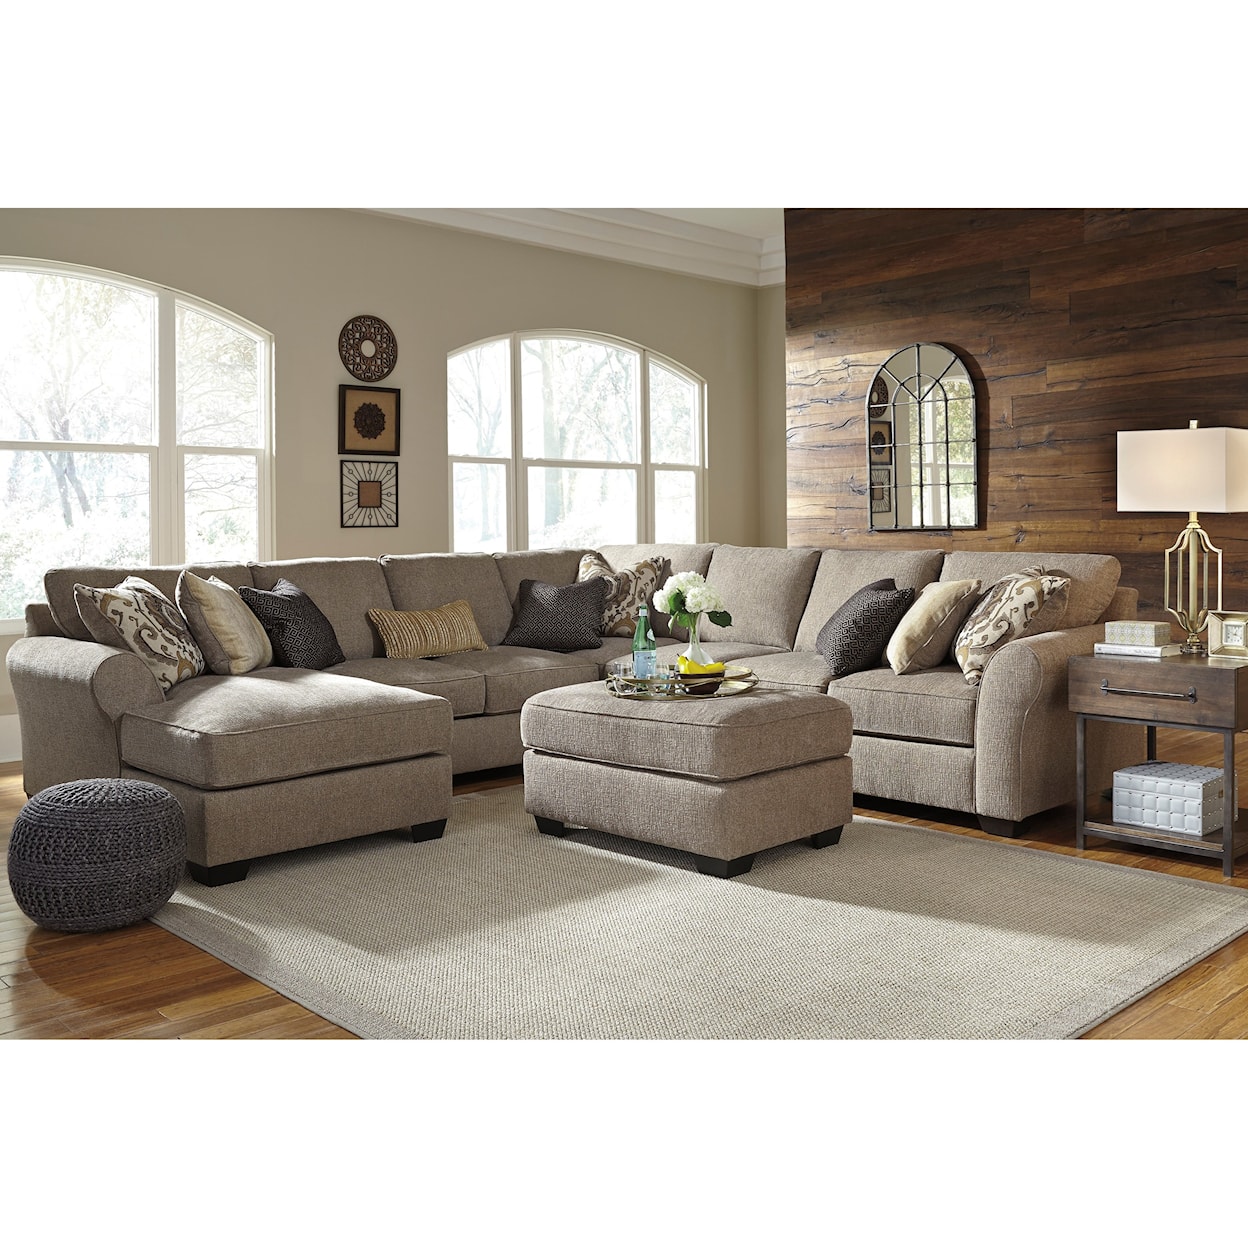 Benchcraft by Ashley Pantomine 5-Piece Sectional with Ottoman